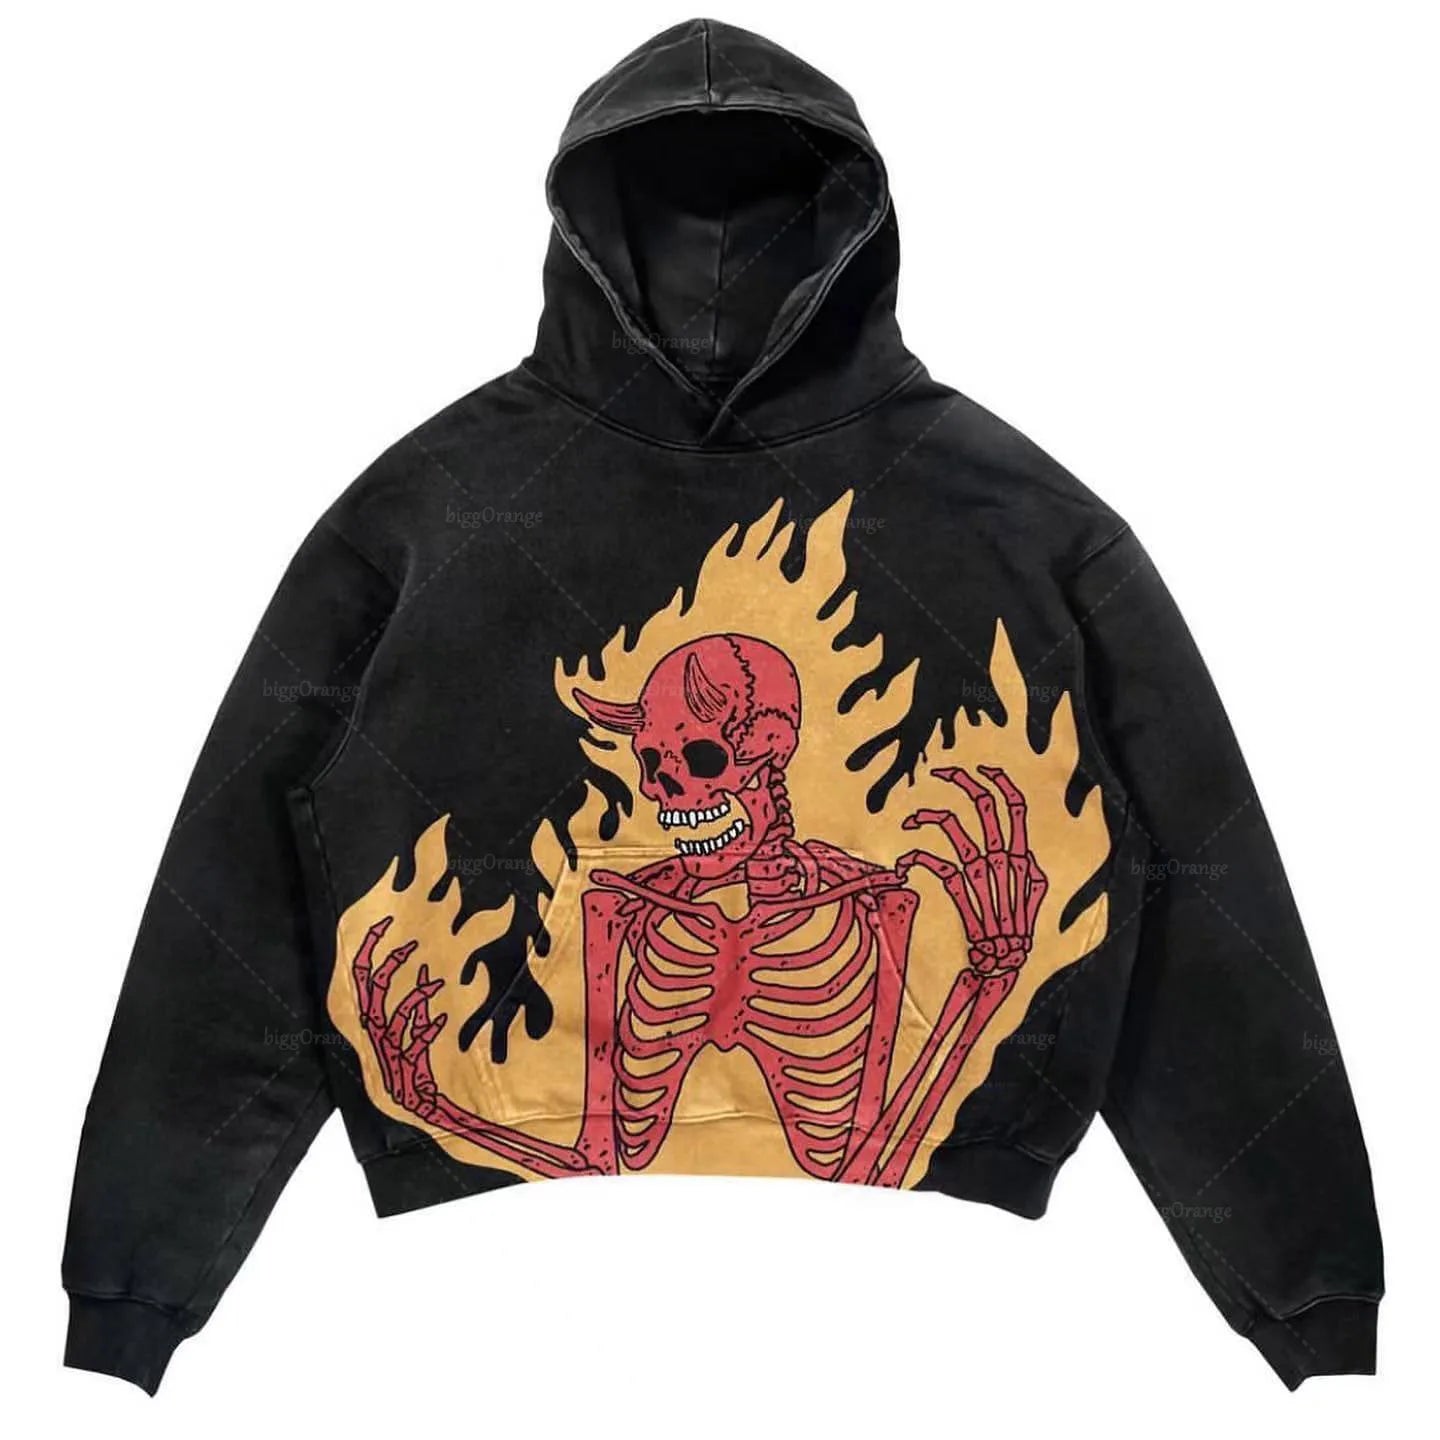 A black hoodie features a graphic of a red skeleton with horns and flames in the background on the front, giving it an Explosions Printed Skull Y2K Retro Hooded Sweater Coat Street Style Gothic Casual Fashion Hooded Sweater Men's Female by Maramalive™ vibe.